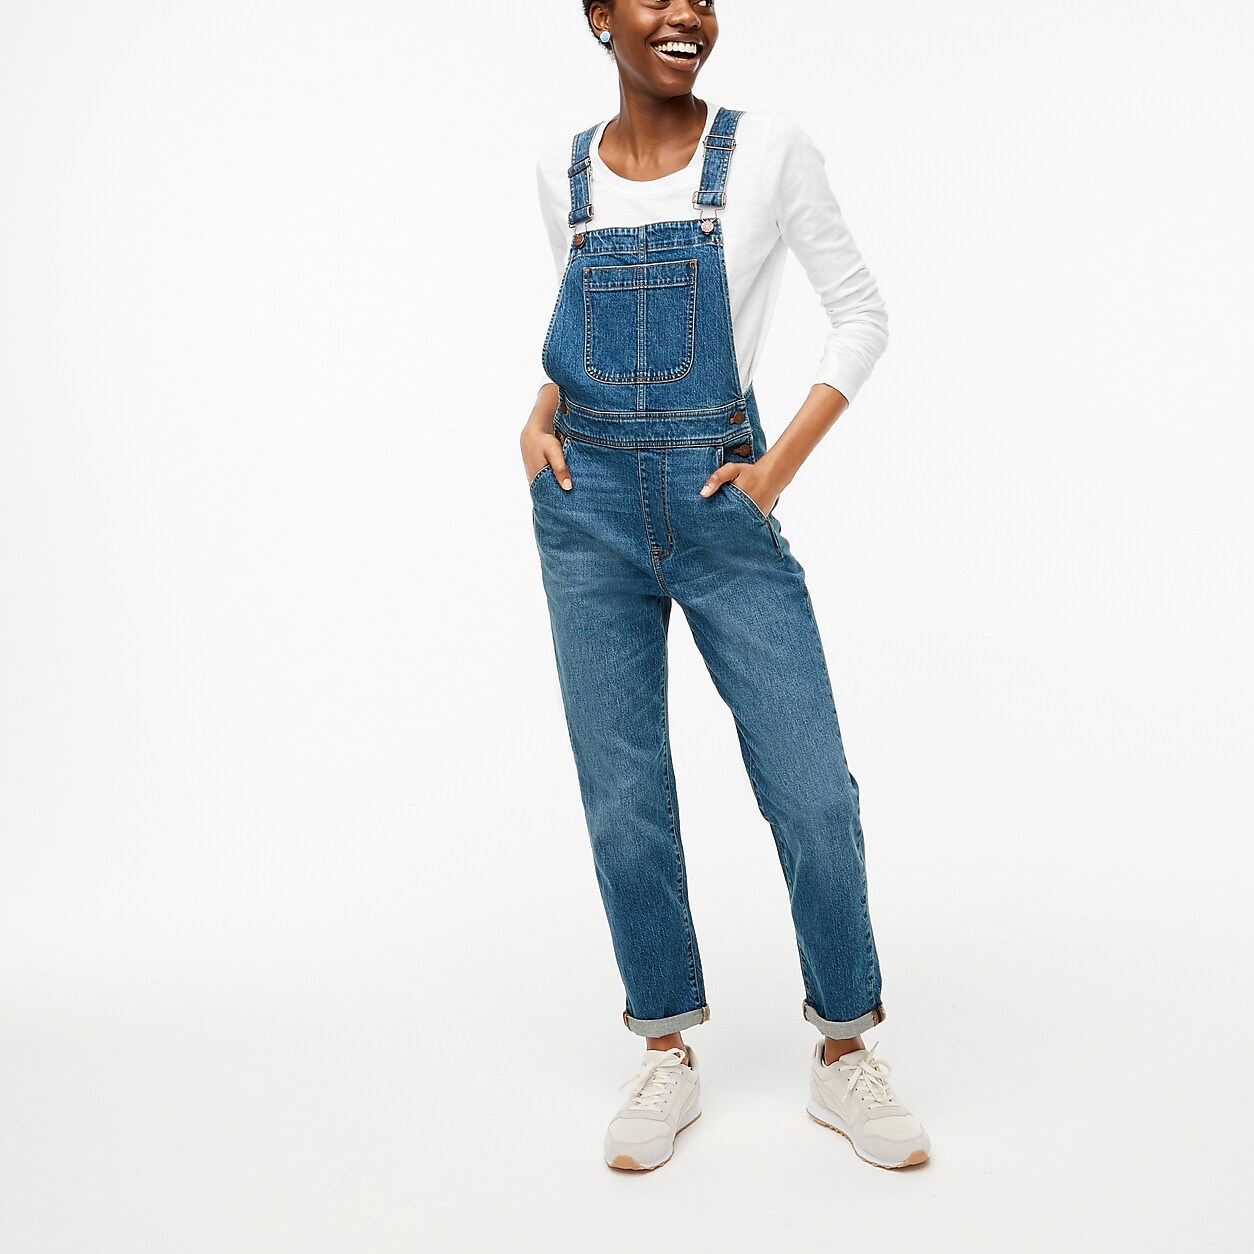 Classic overalls in all-day stretch